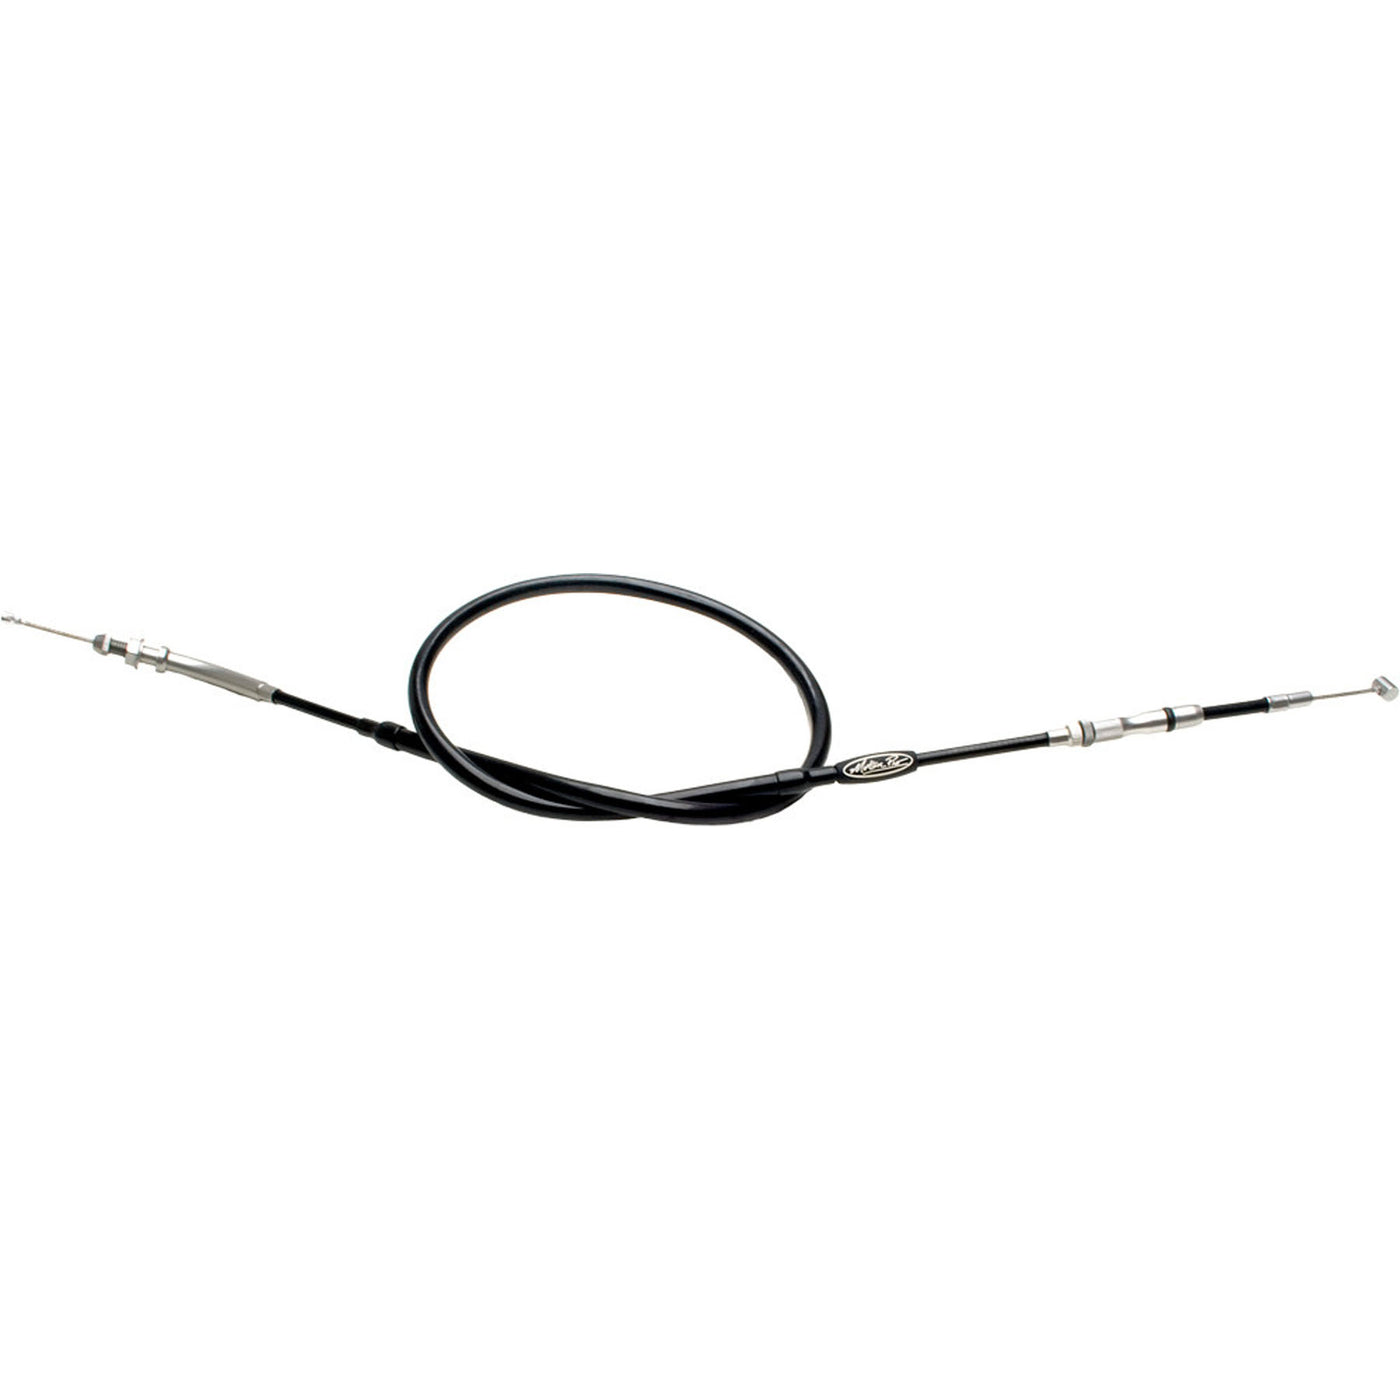 CABLE, T3 SLIDELIGHT, HOT STARTCRF450R#mpn_02-3004